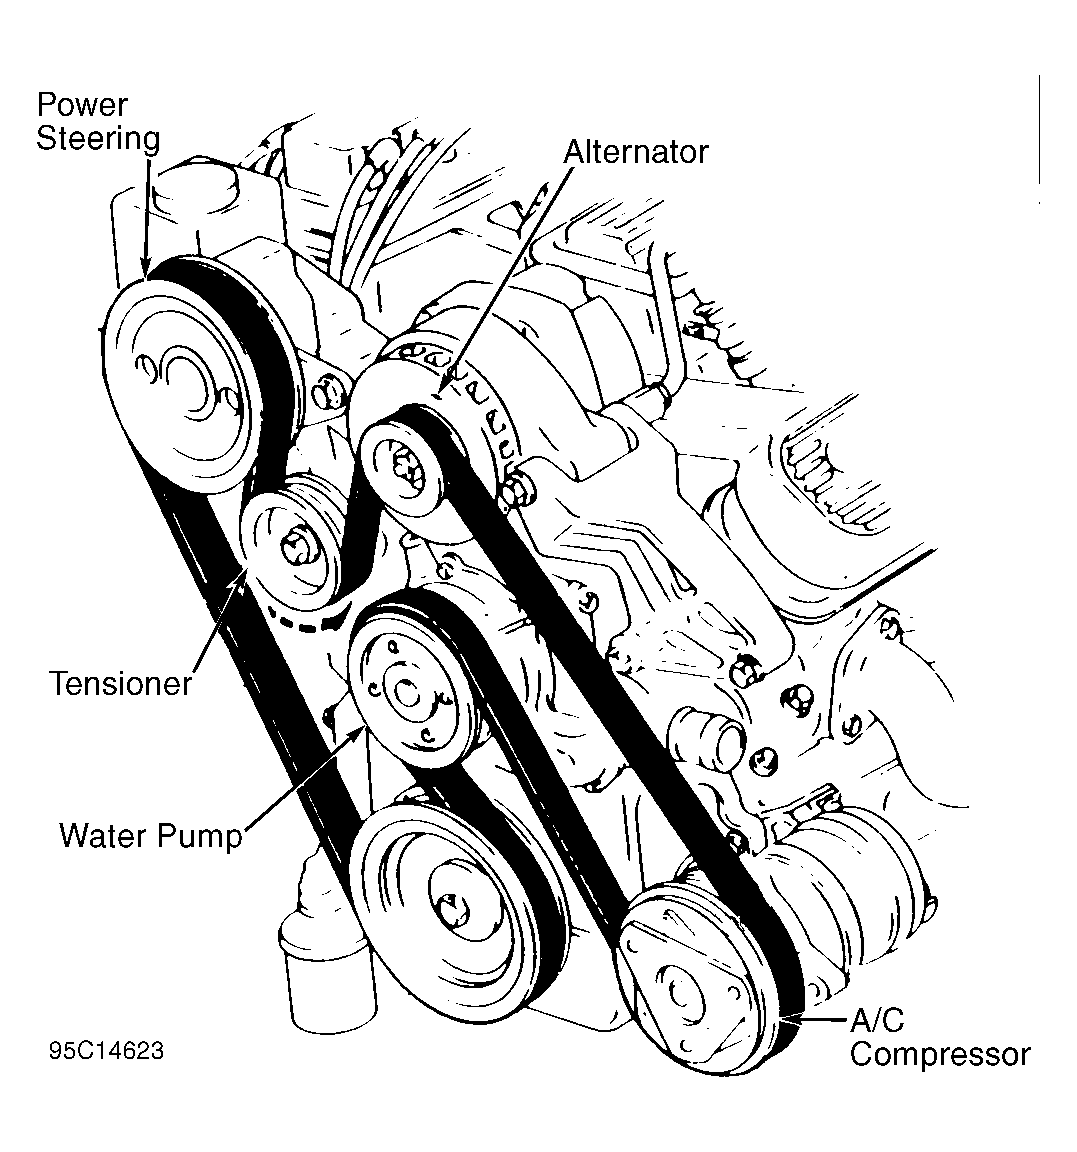 1995 Buick Lesabre Serpentine Belt Routing And Timing Belt